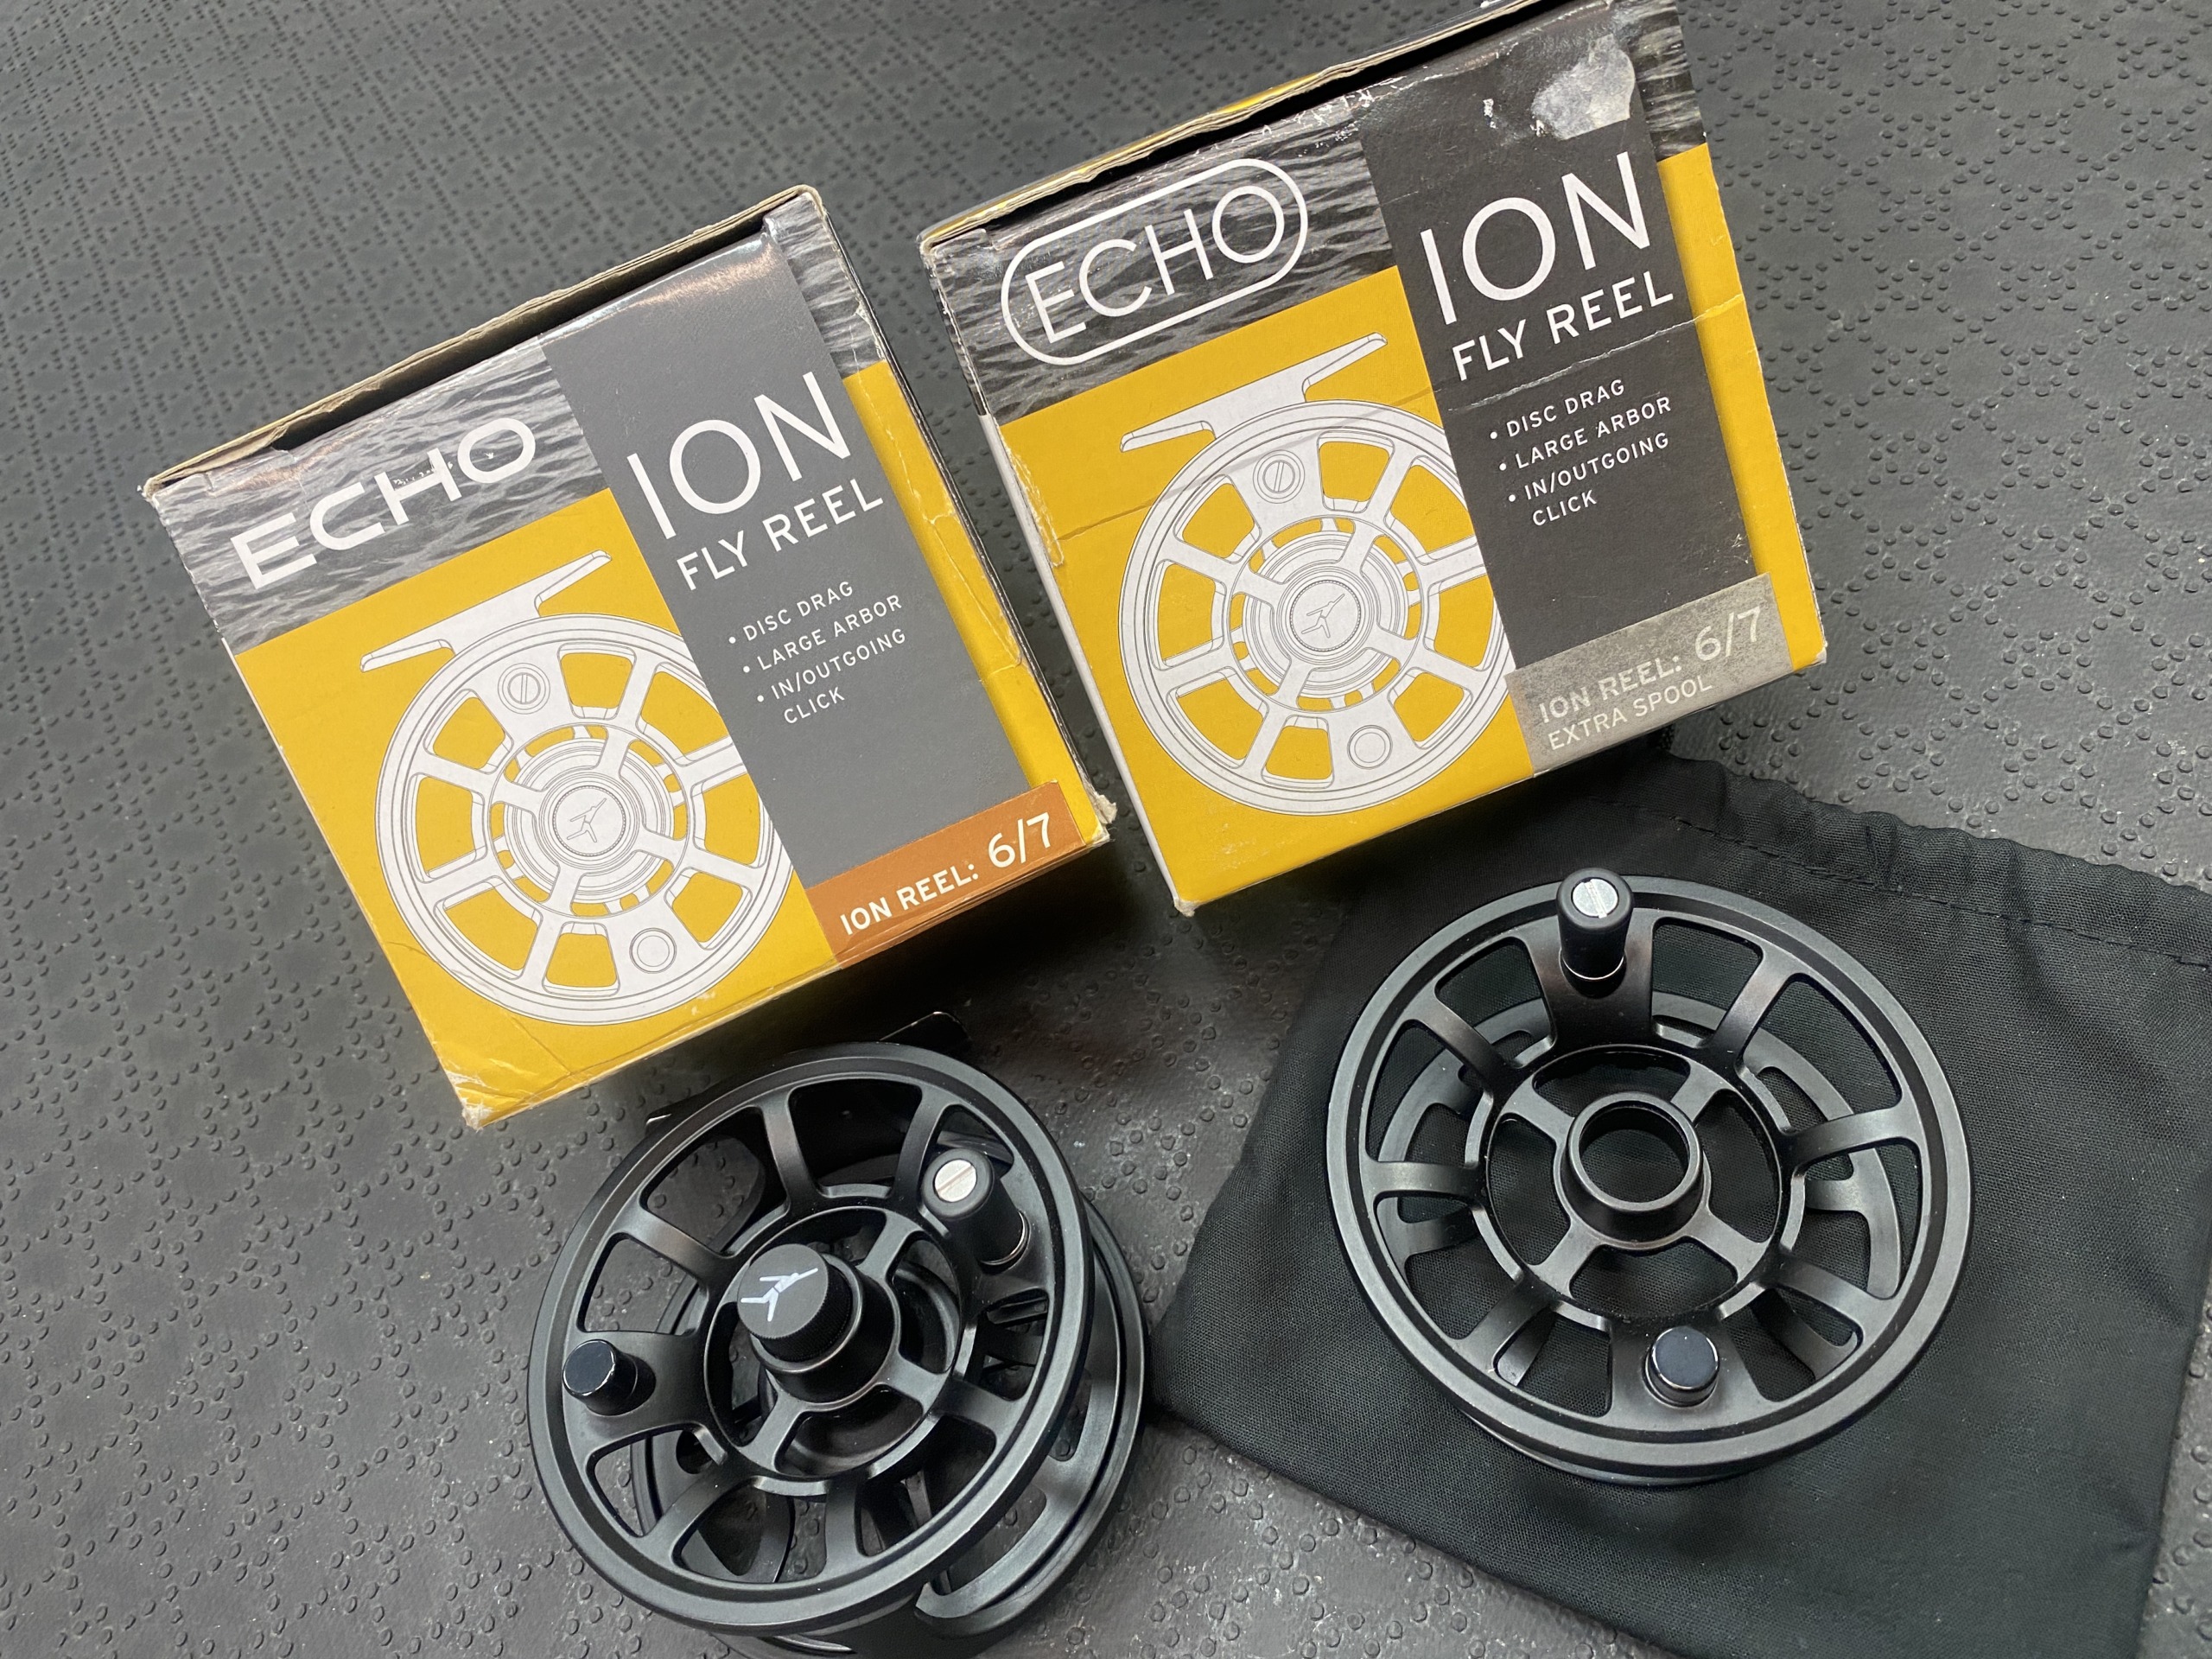 Echo Ion Fly Fishing Reel Product Details